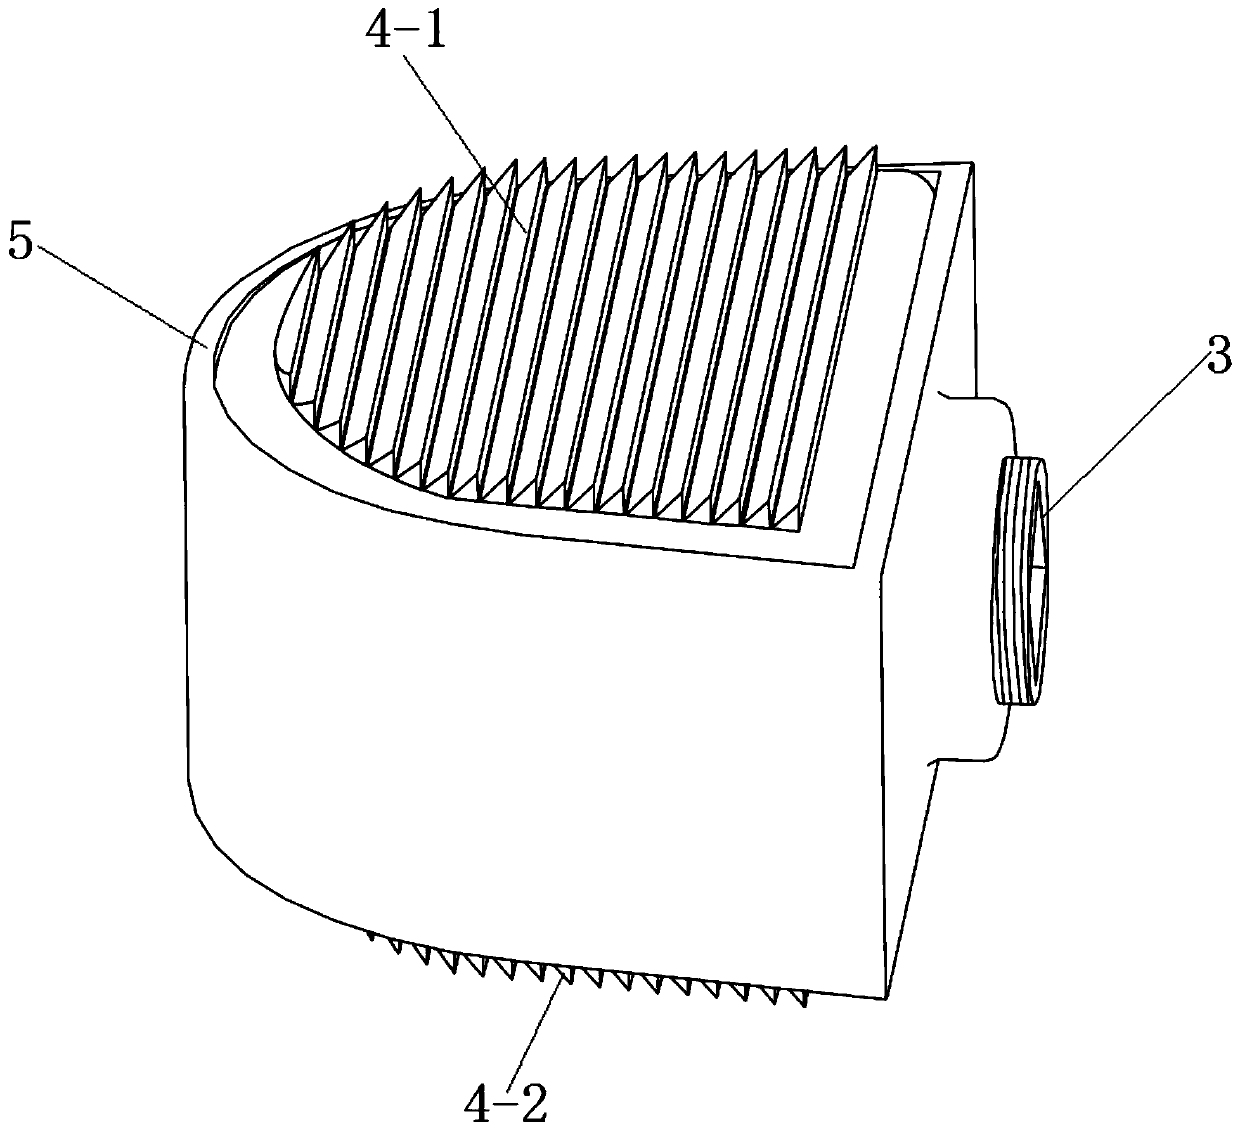 Height-adjustable self-locking interbody fusion cage device